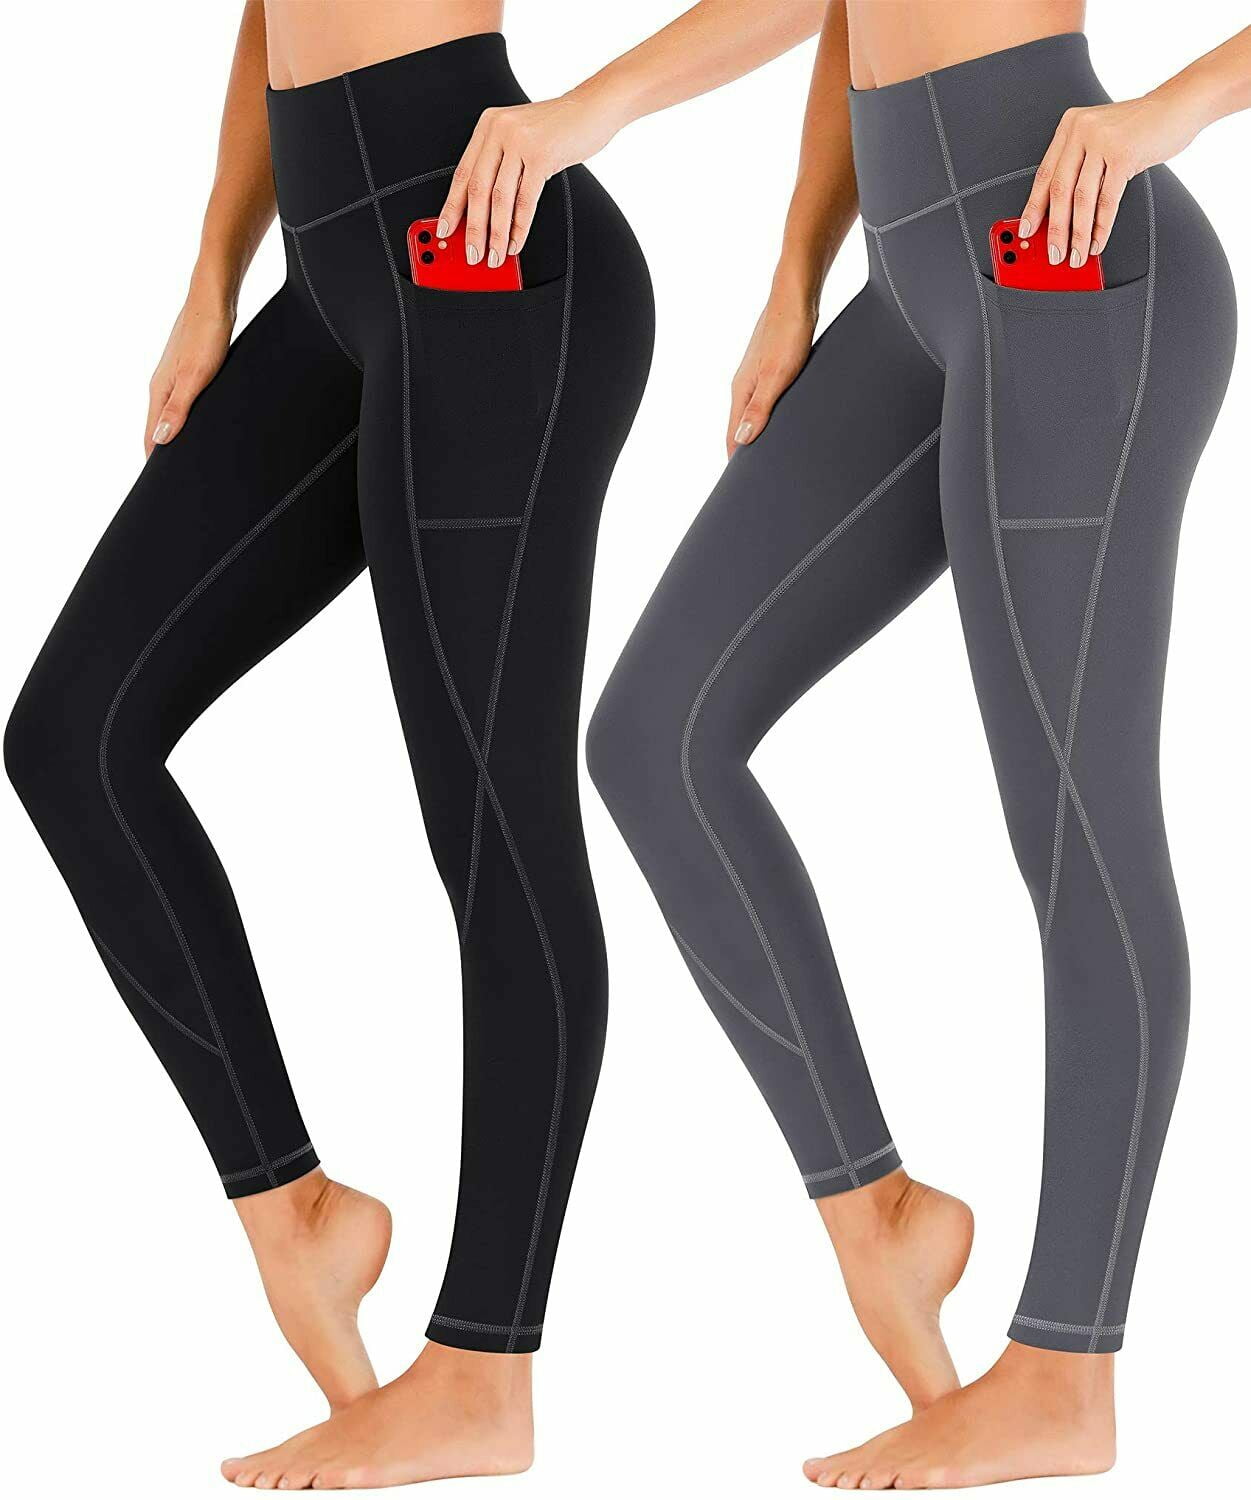 Heathyoga Leggings with Pockets for Women Yoga Pants with Pockets High Waisted Workout Leggings for Women Yoga Leggings